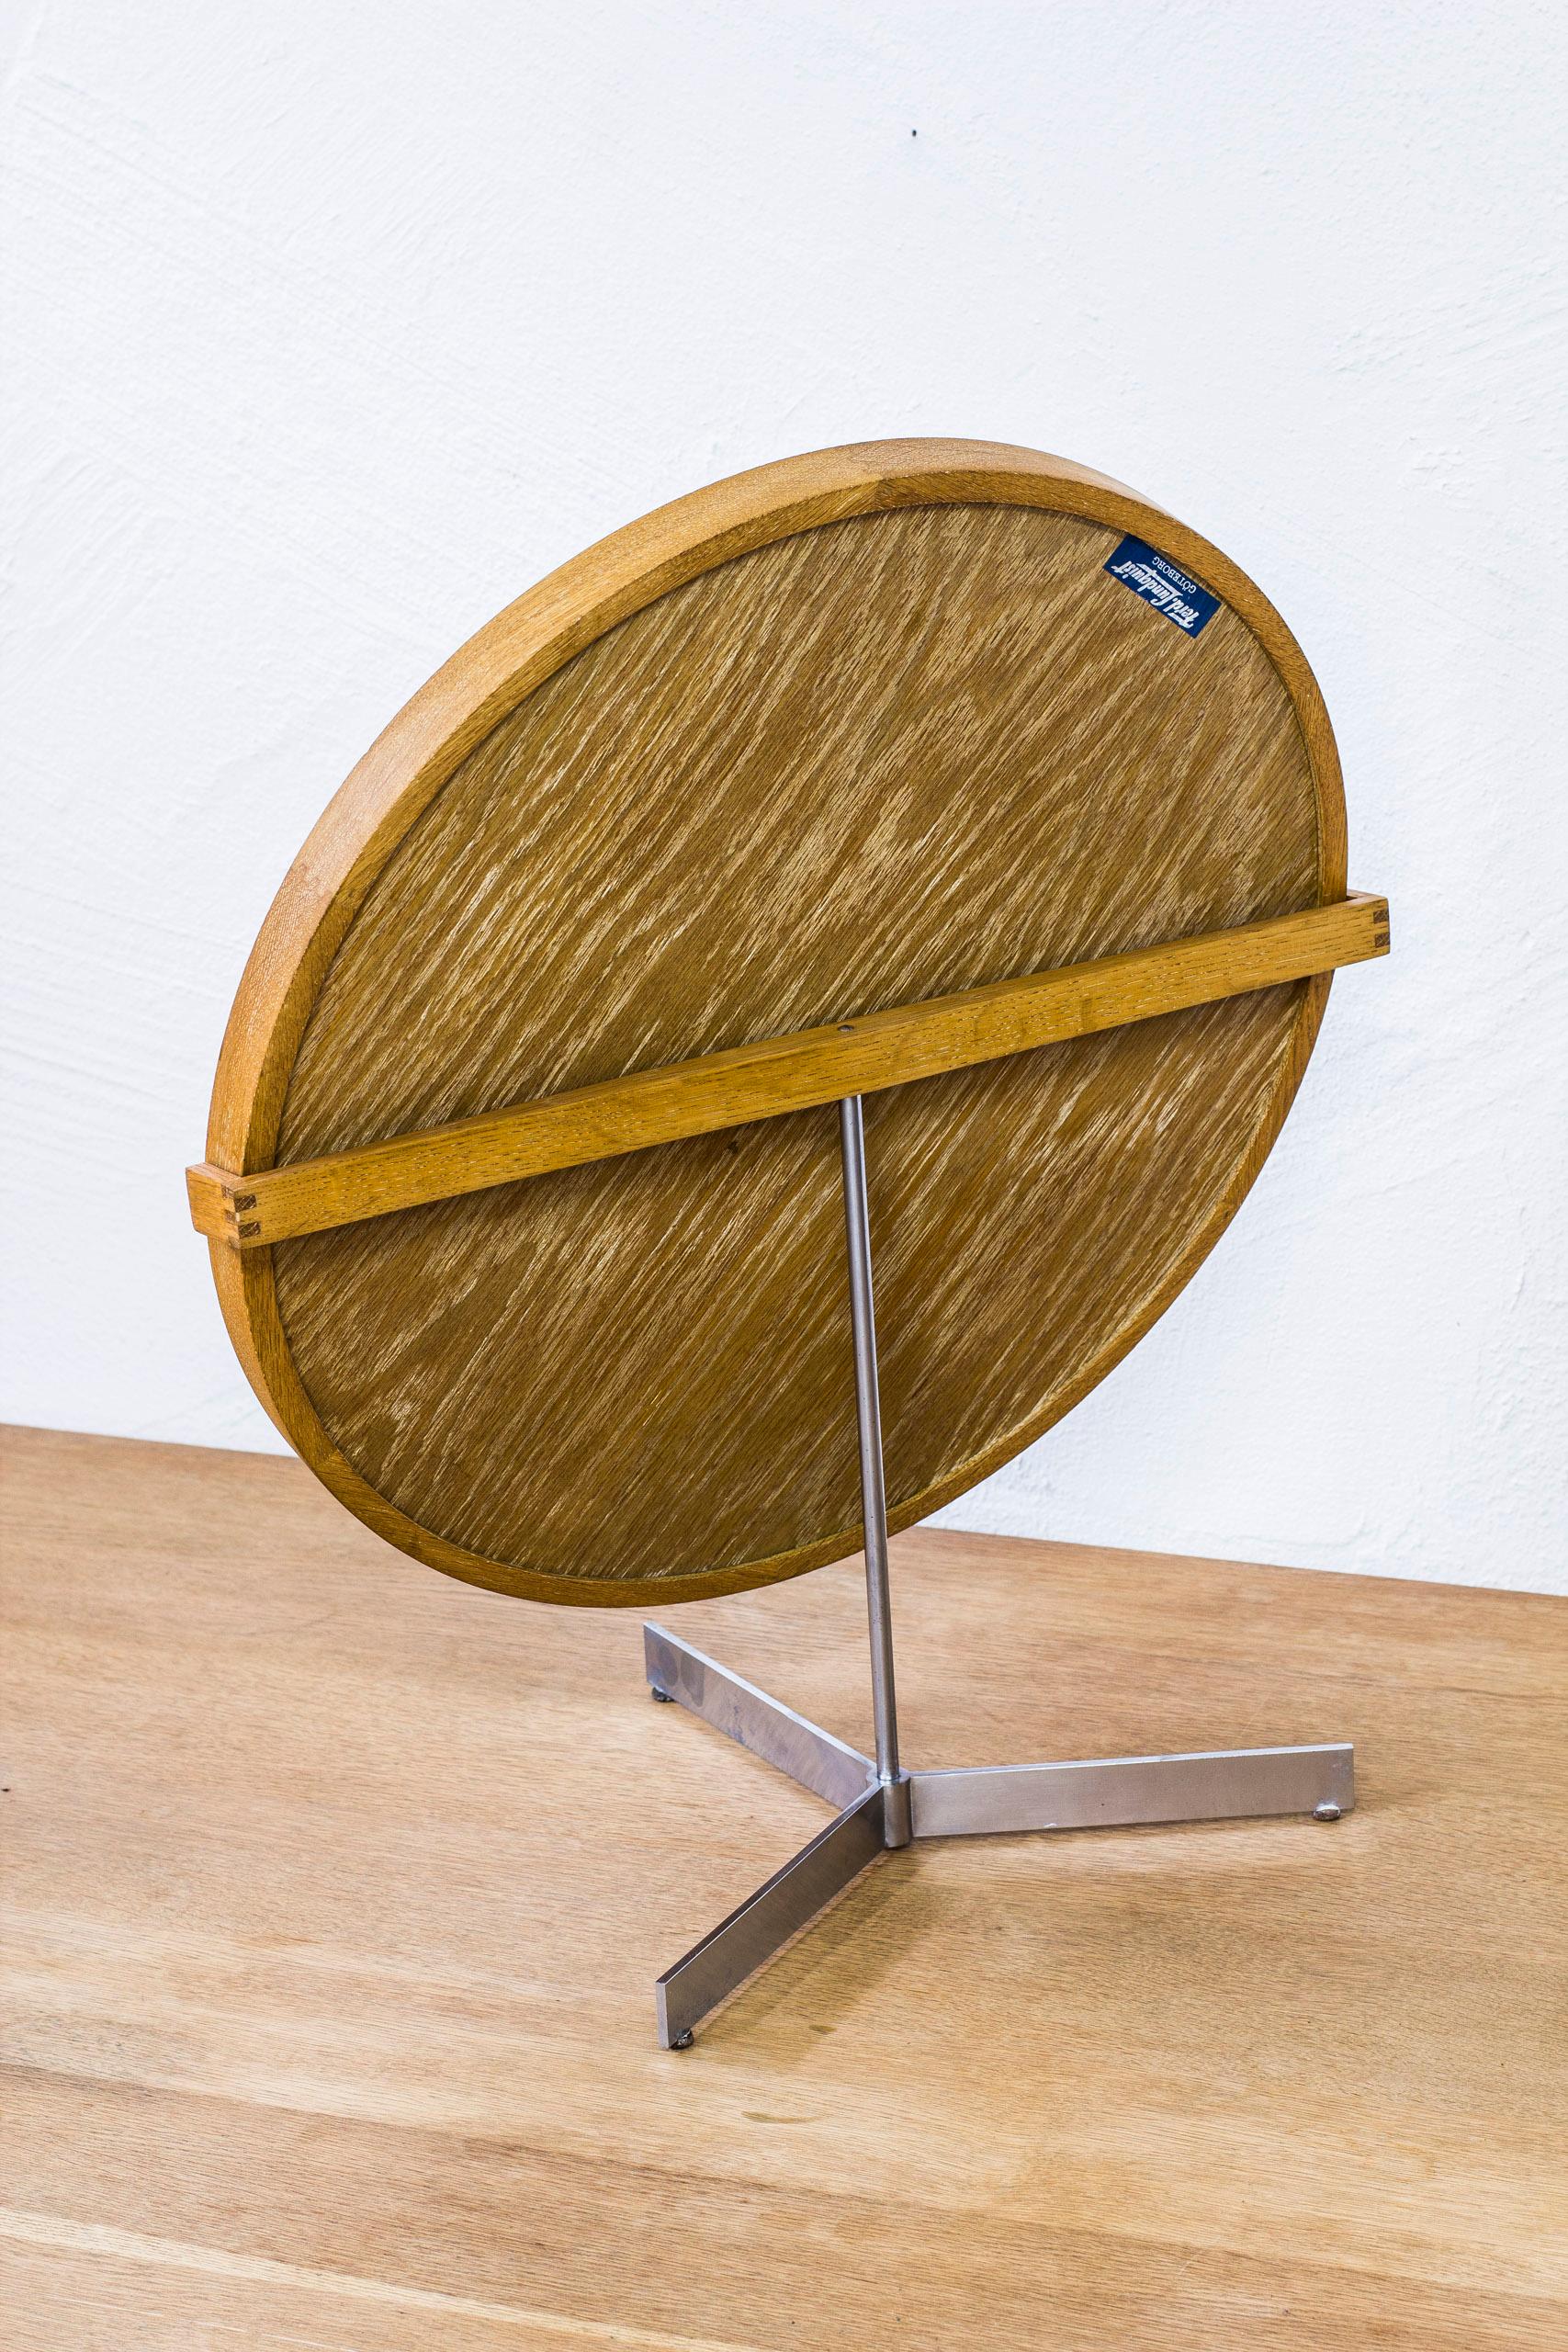 Rare large table mirror designed by Uno & Östen Kristiansson. Produced by Swedish company Luxus during the 1950s. Frame made from solid lime treated oak with leather lining holding the mirror in place. Zipper joinery on the frame and the back piece.